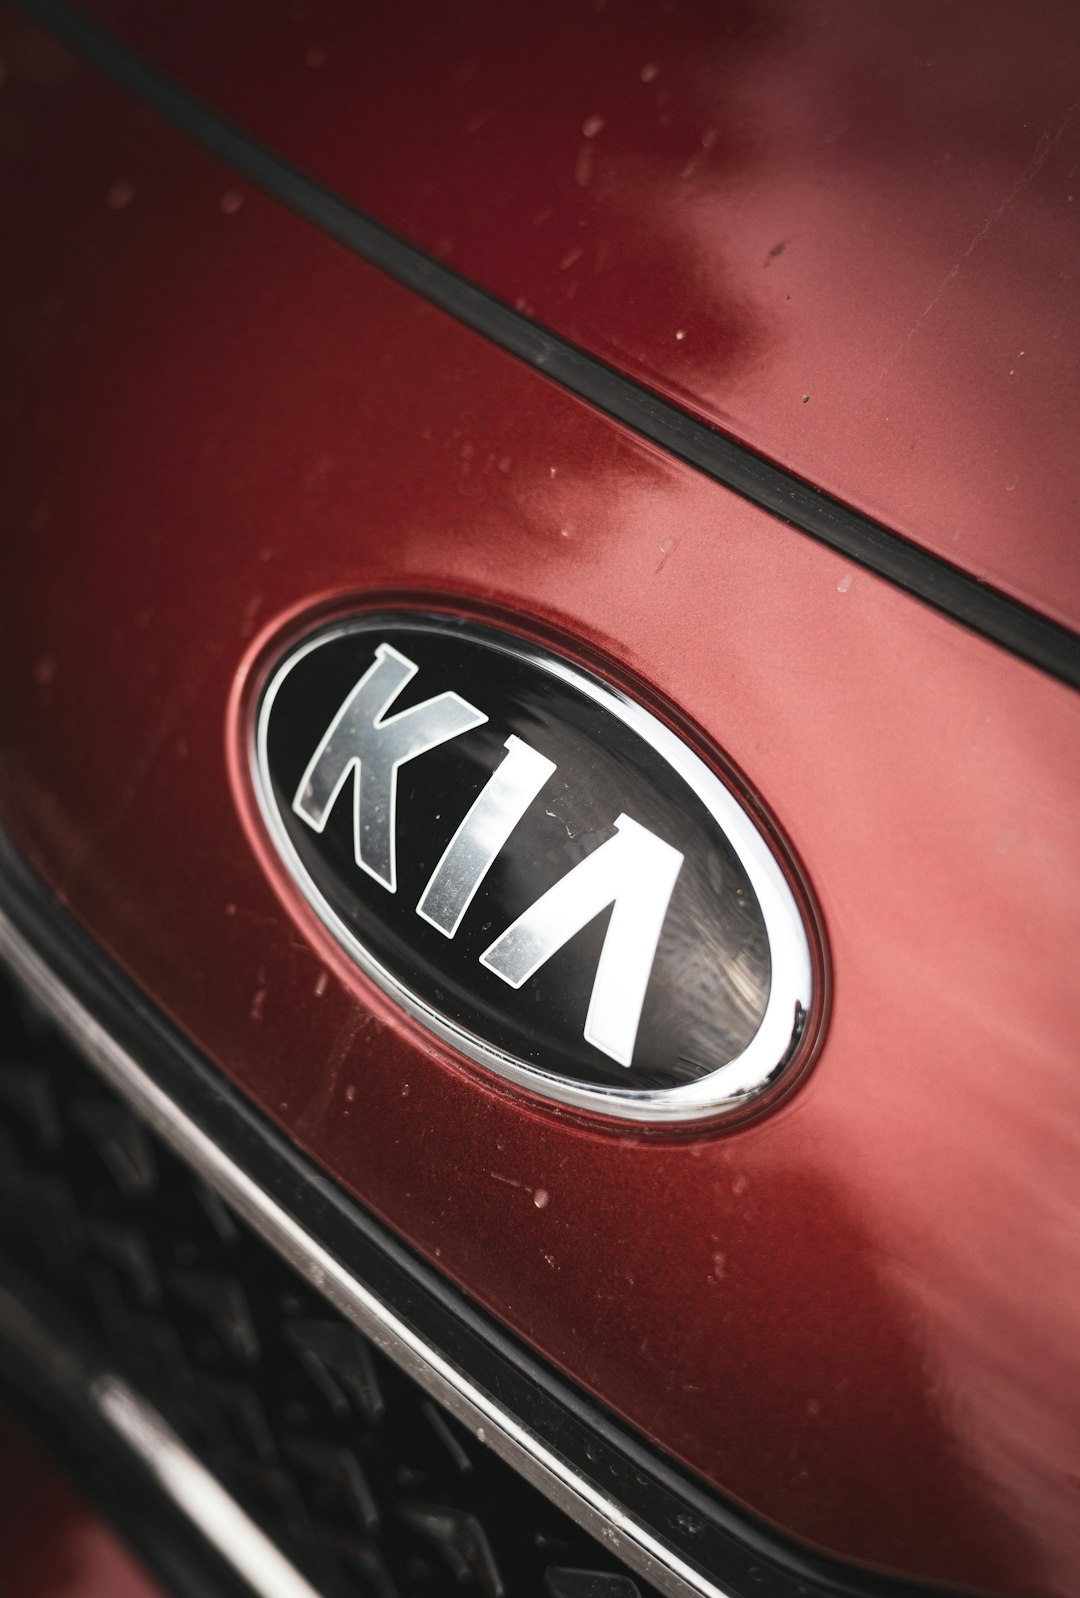 The Kia K5 is a sleek and stylish sedan with impressive performance and advanced technology features.